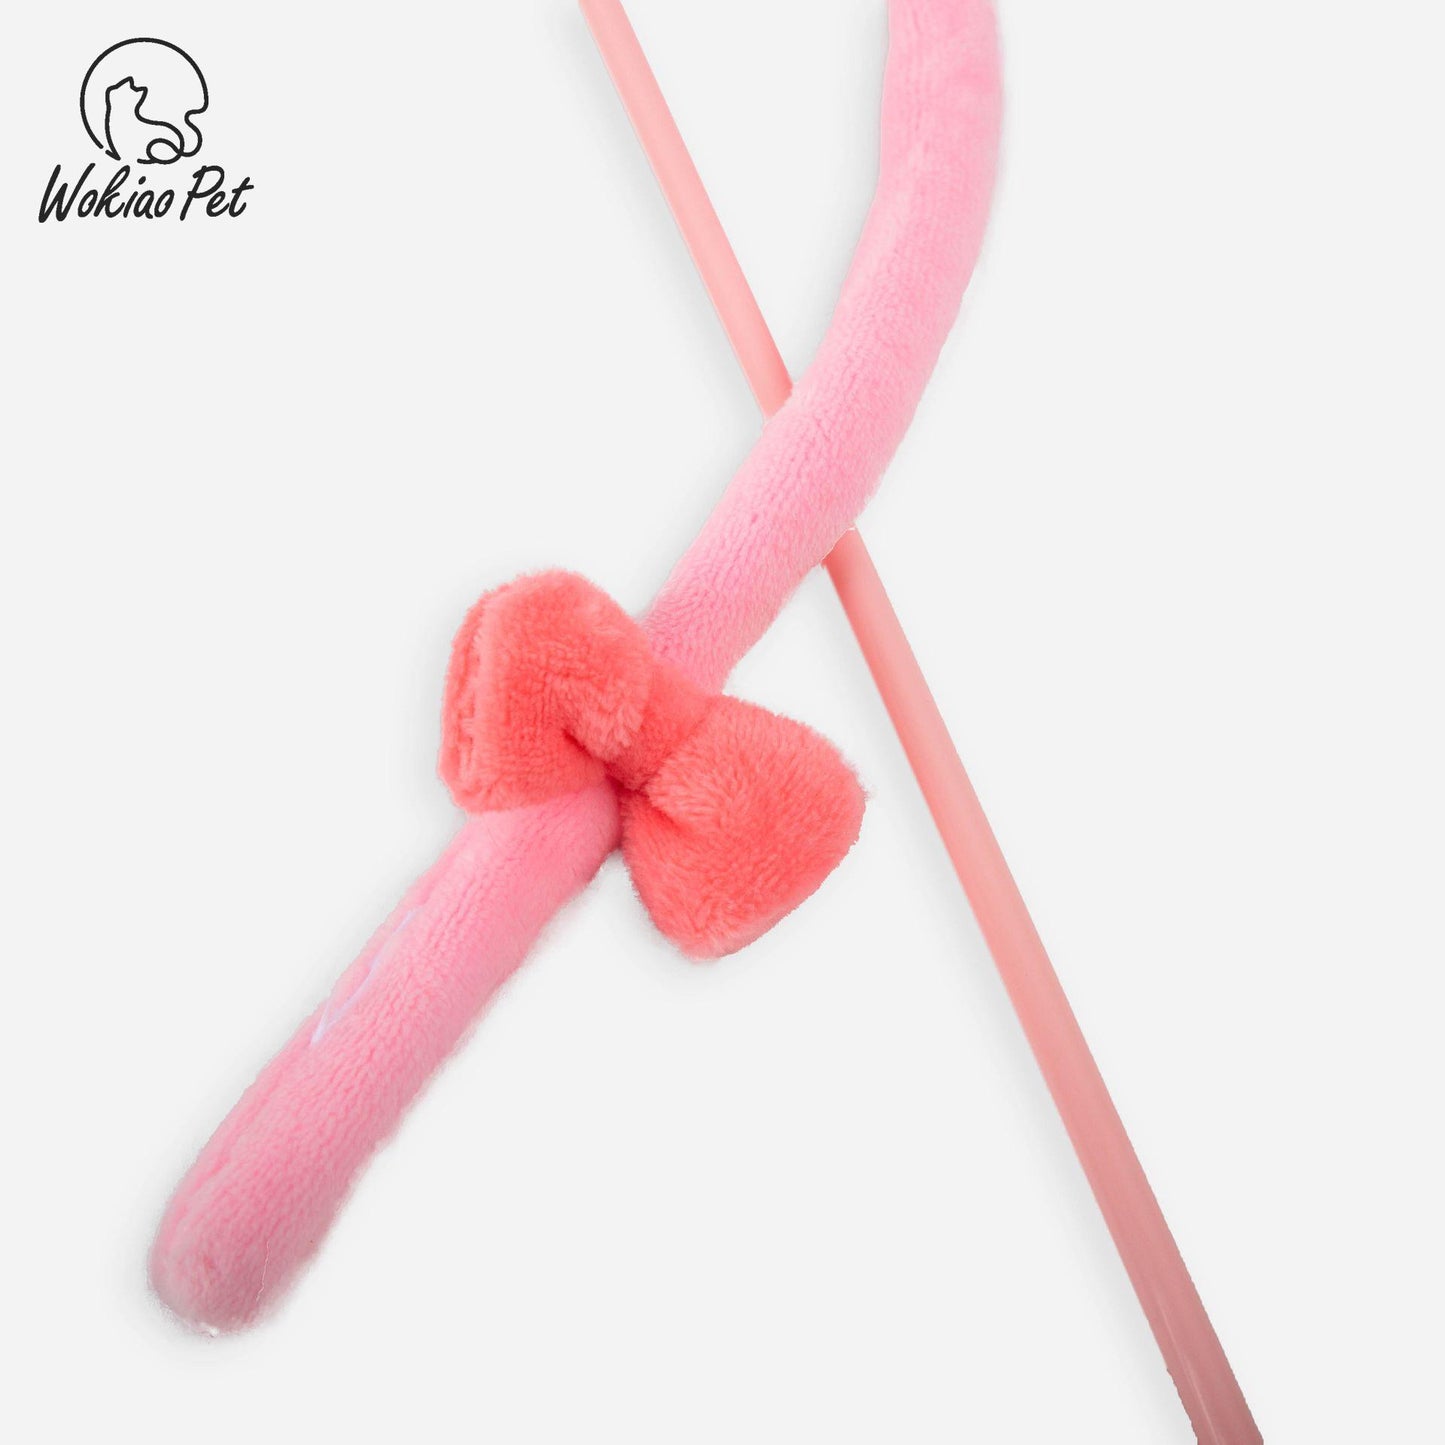 Pink-tailed cat wand toy, perfect for kittens.